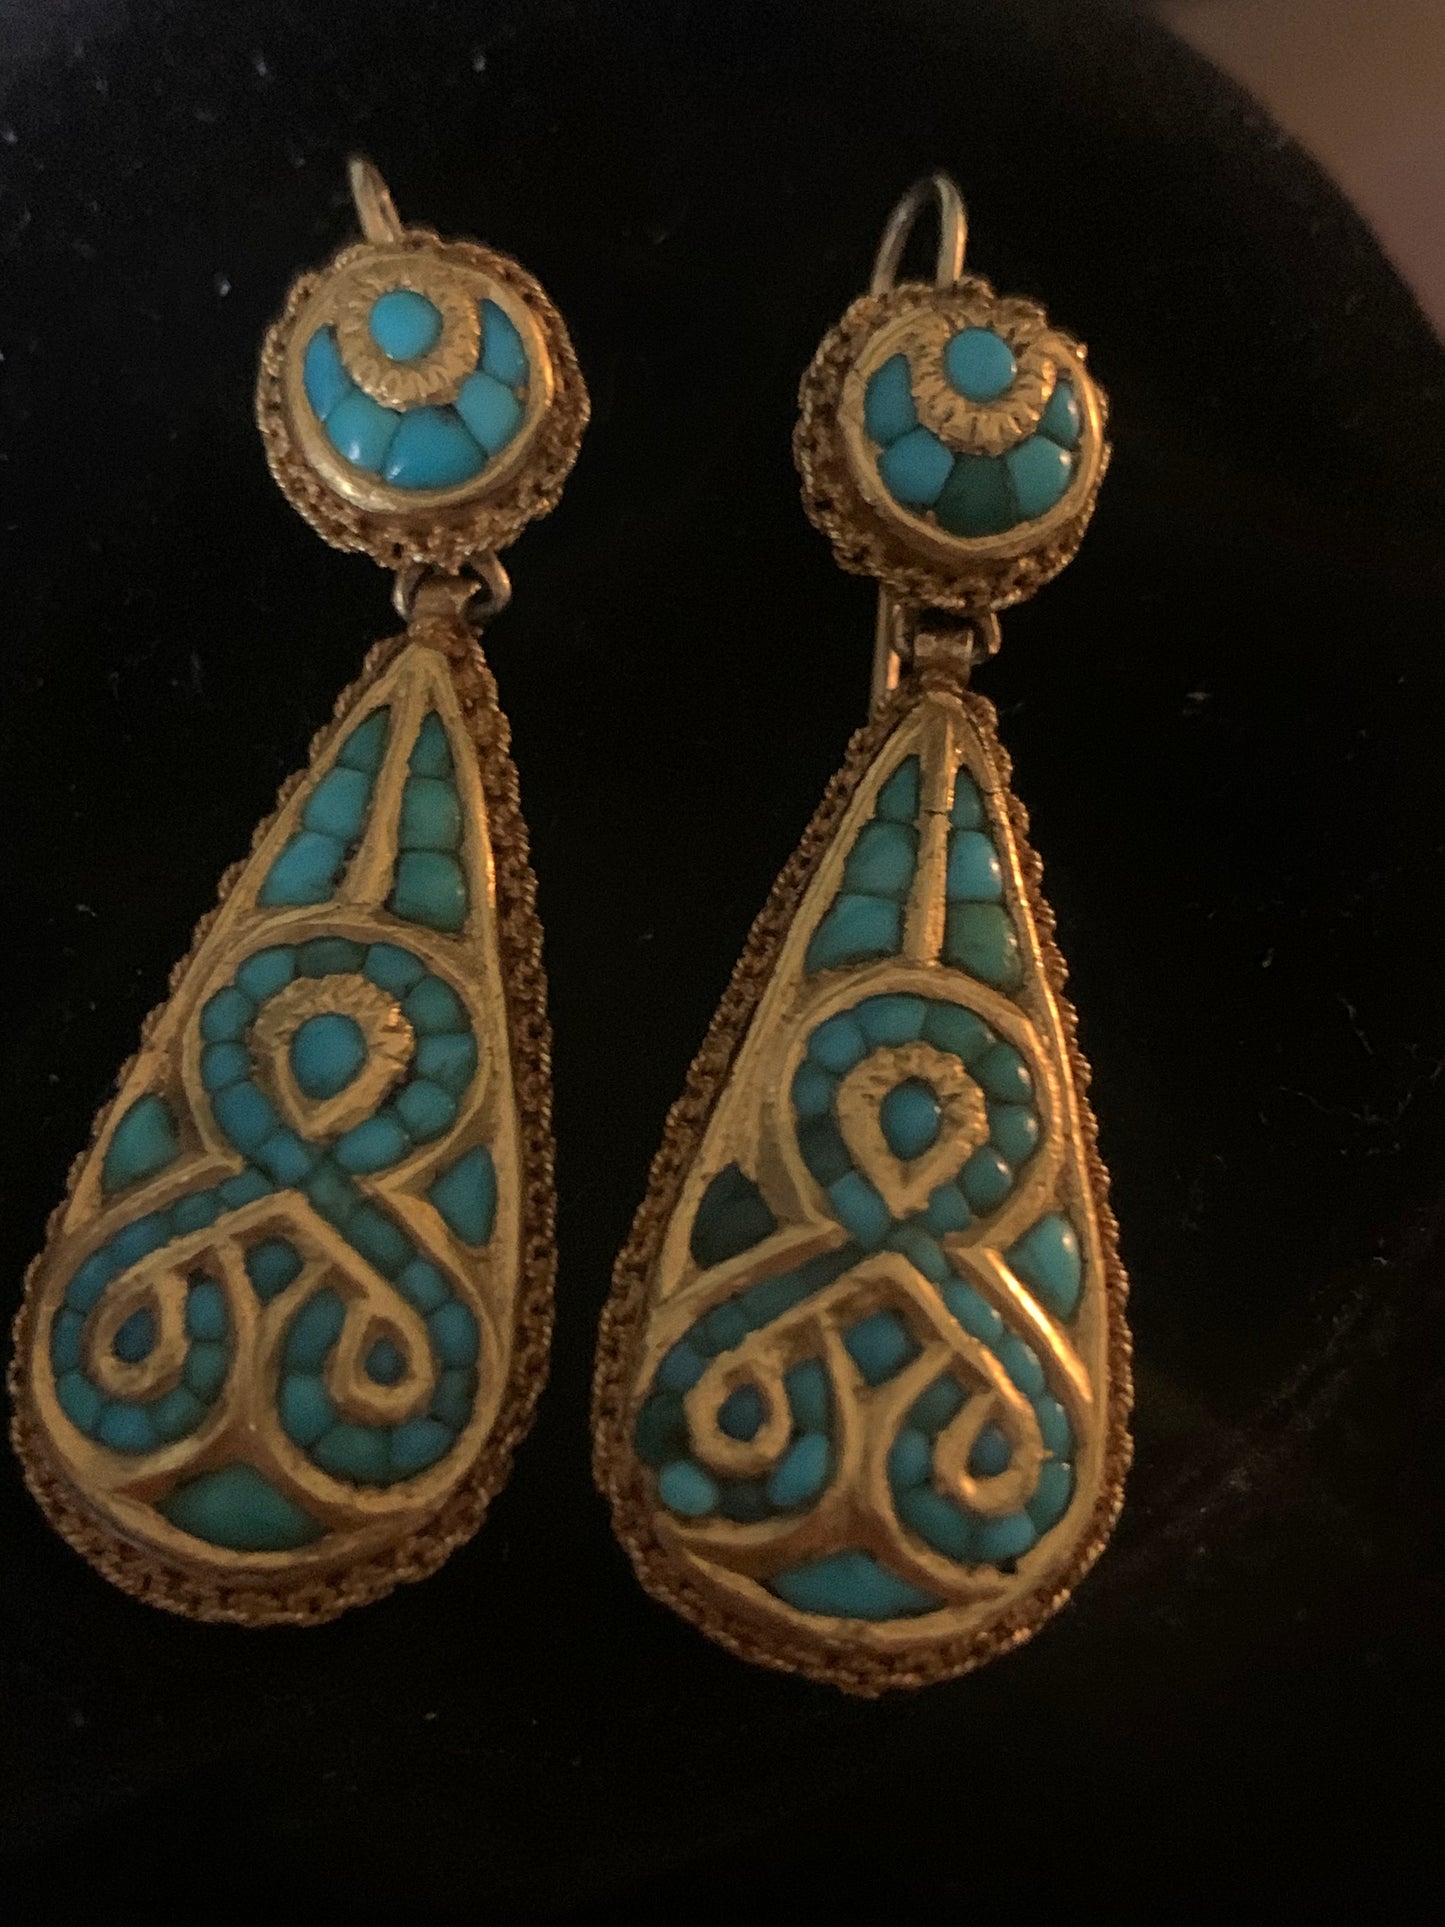 Antique turquoise ear rings